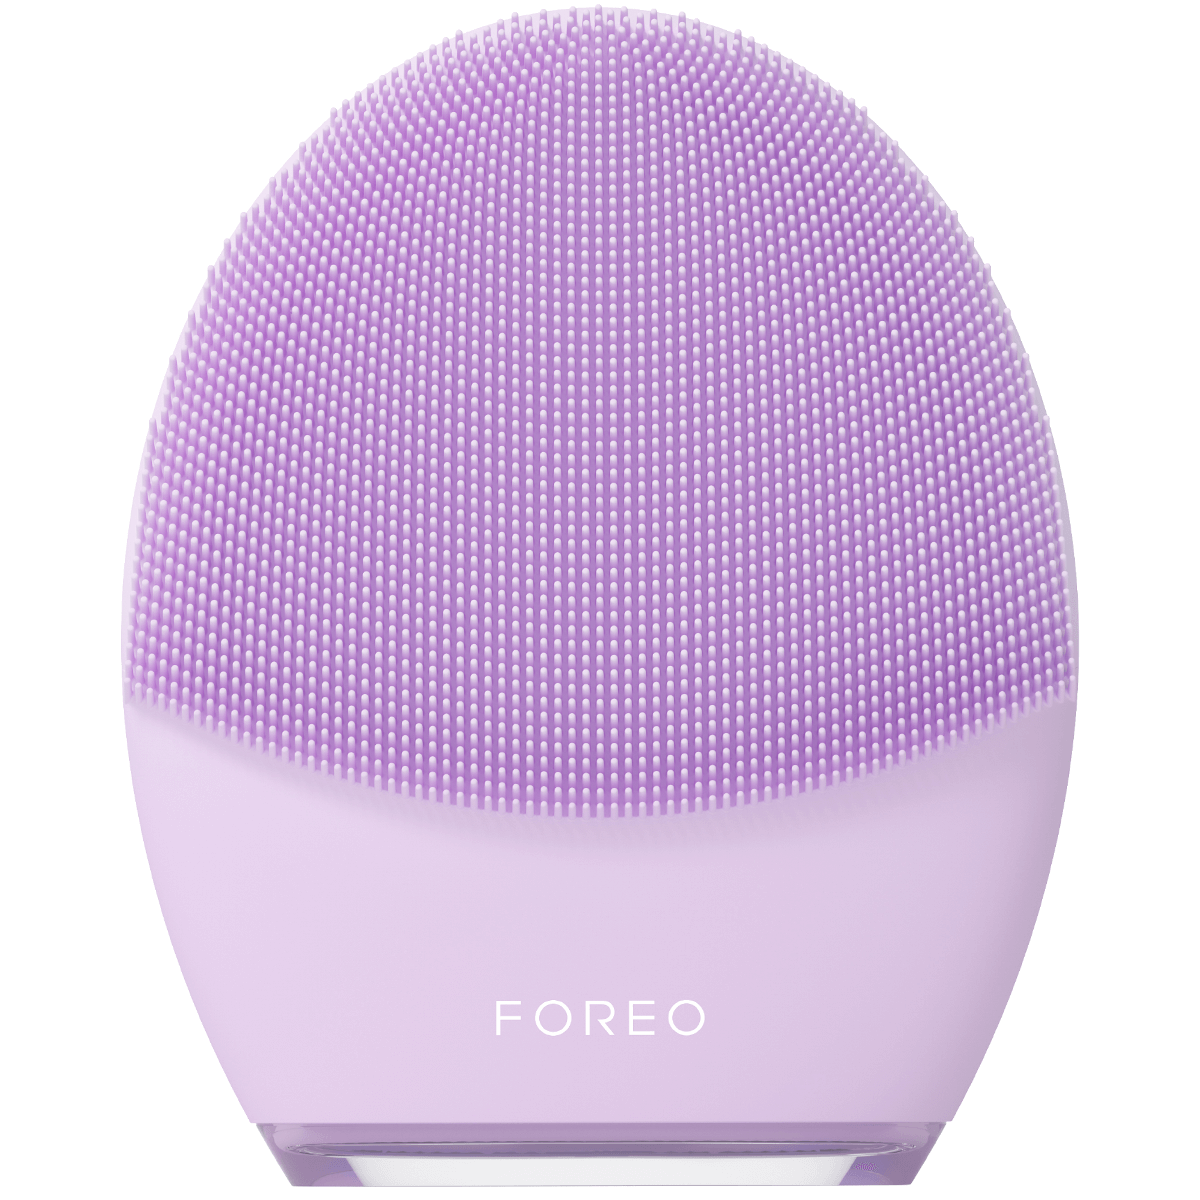 CurrentBody Removal IPL FOREO 2 Advanced US | PEACH Hair Device